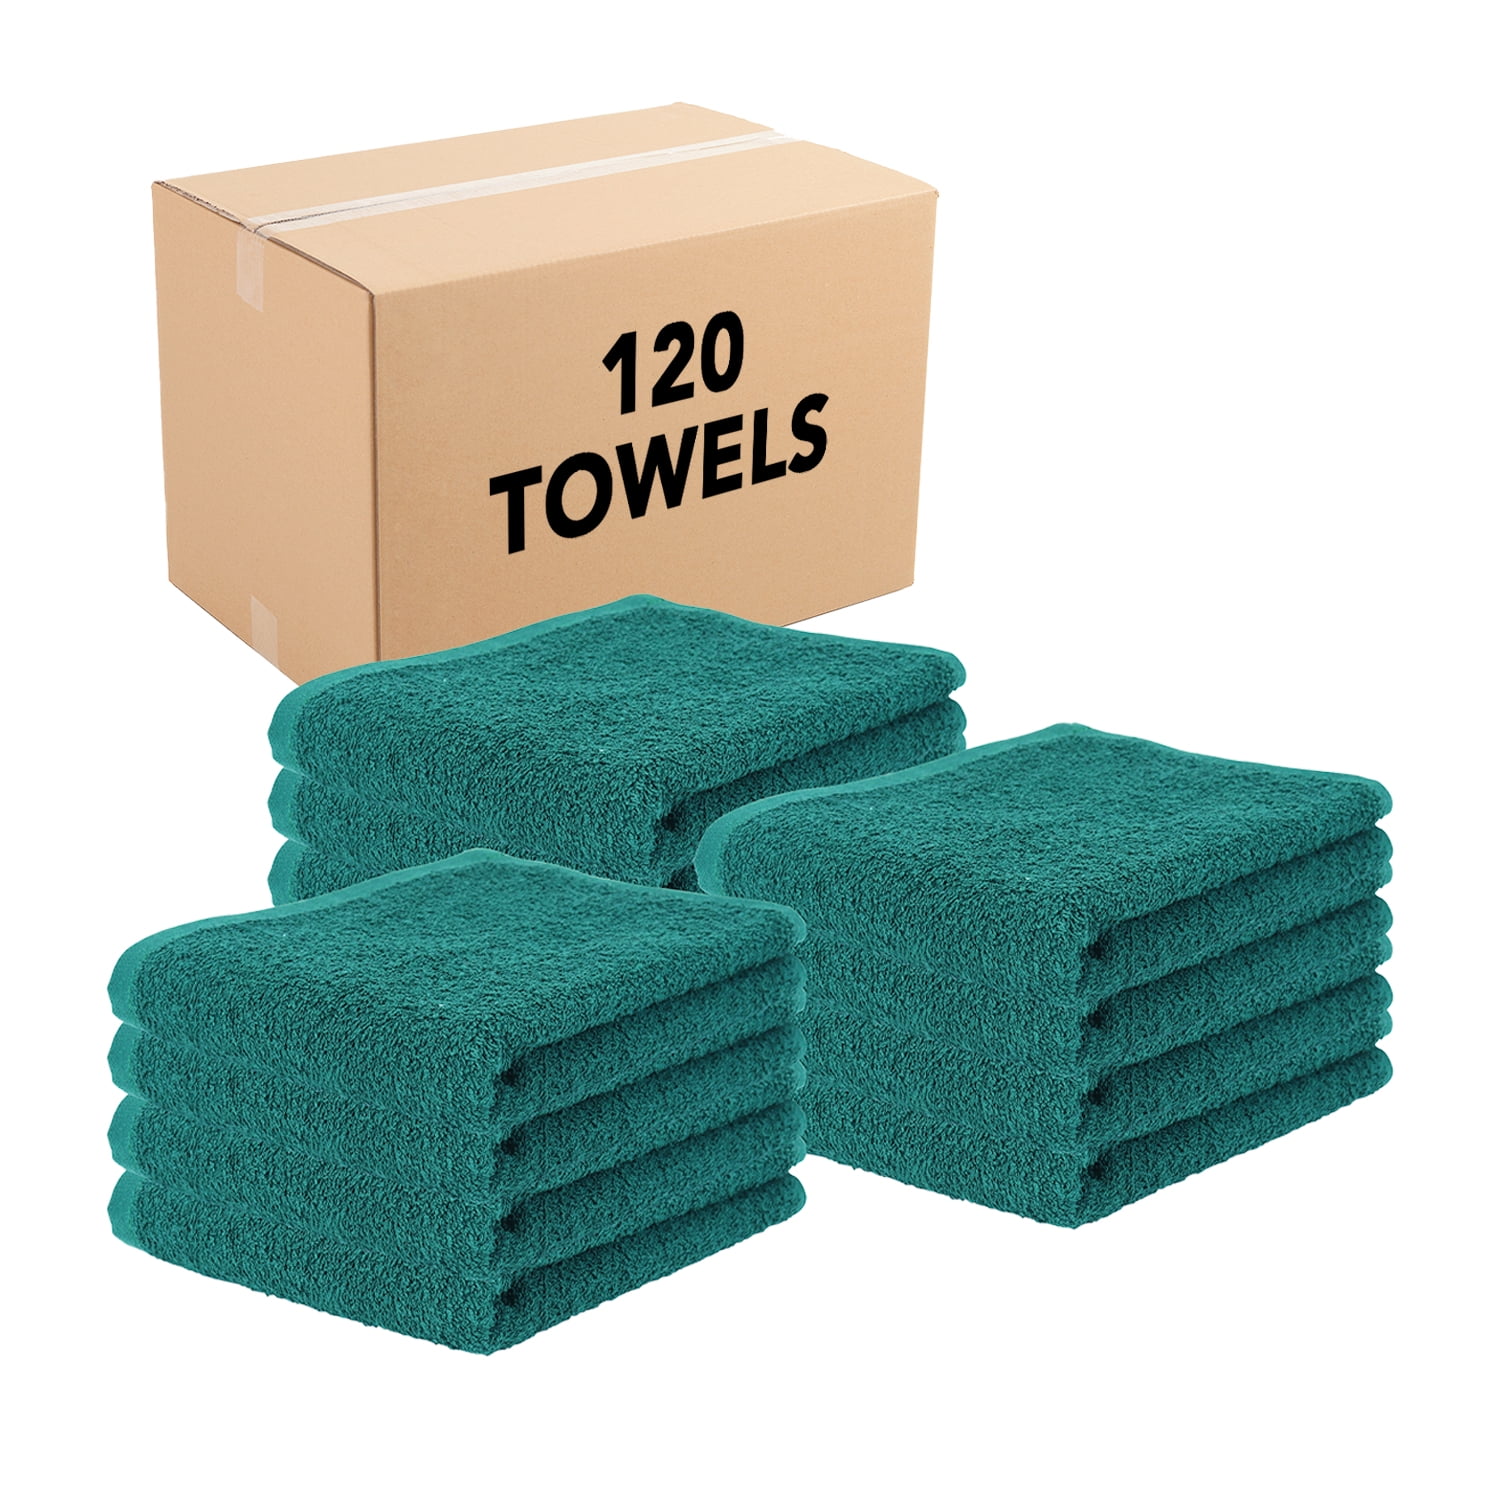 Arkwright TT60 White Terry Mop Towels Bulk - Cleaning Cotton